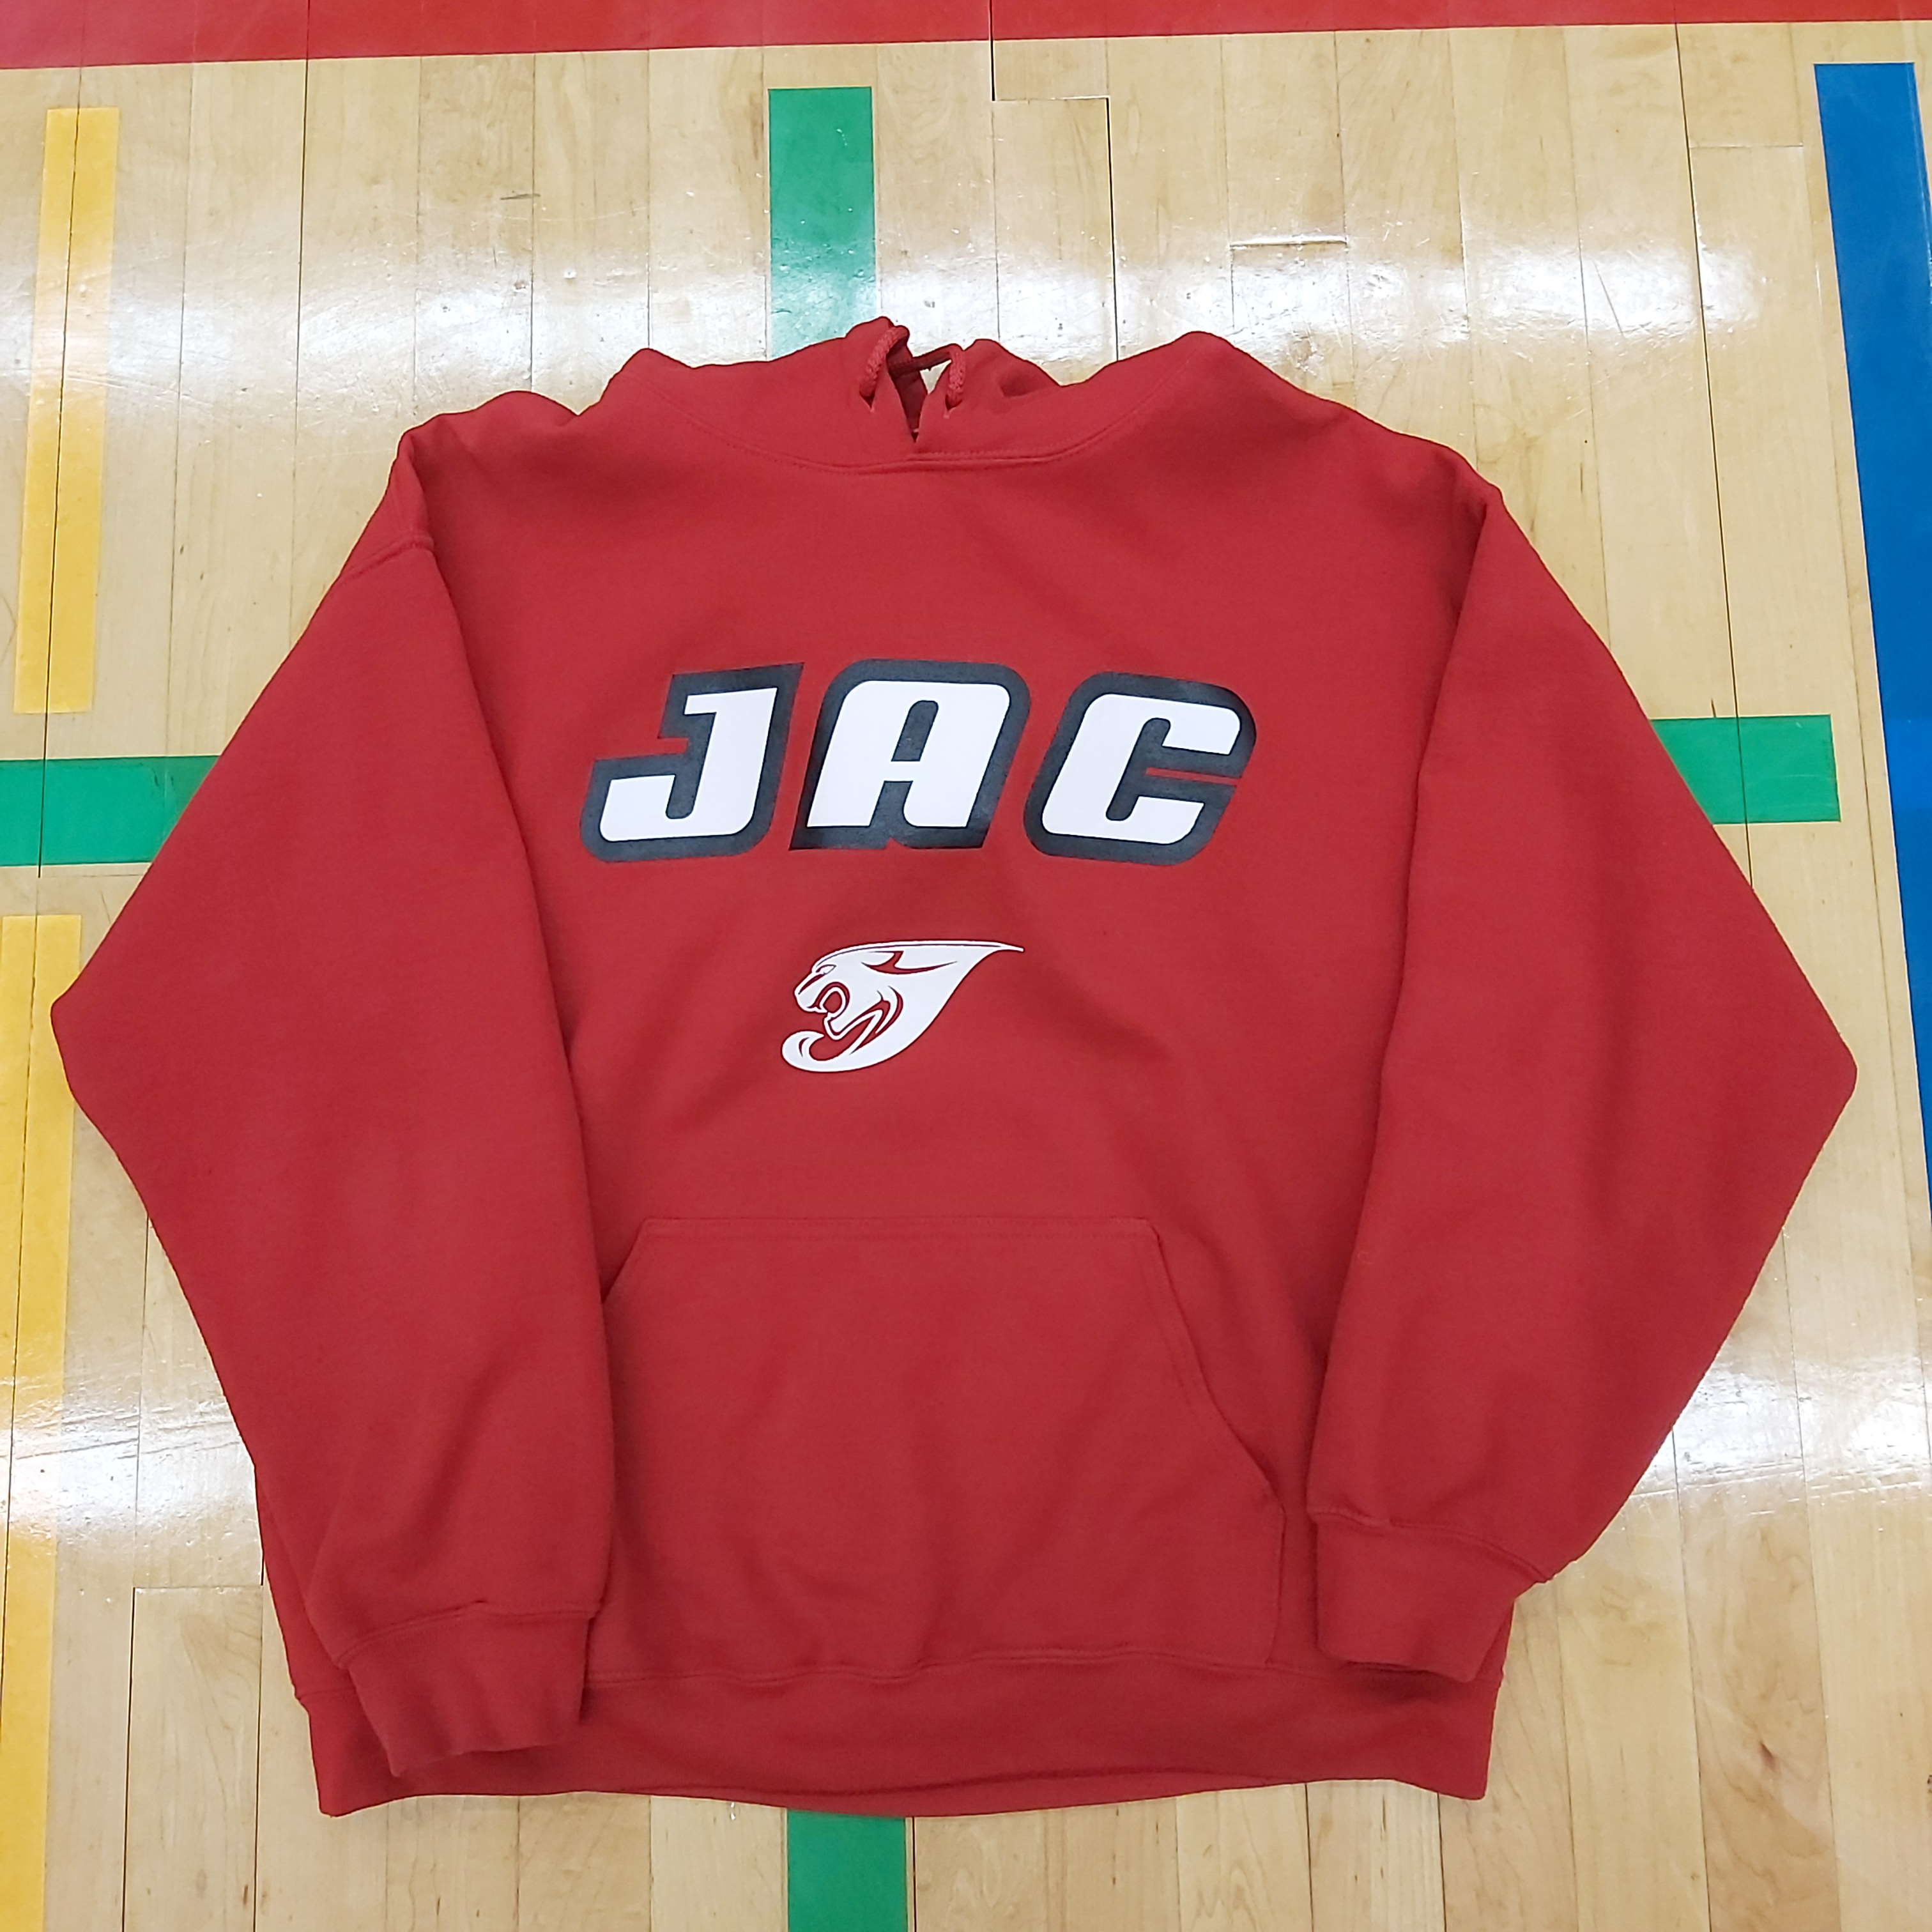 MPJ Athletic Council red hoodie